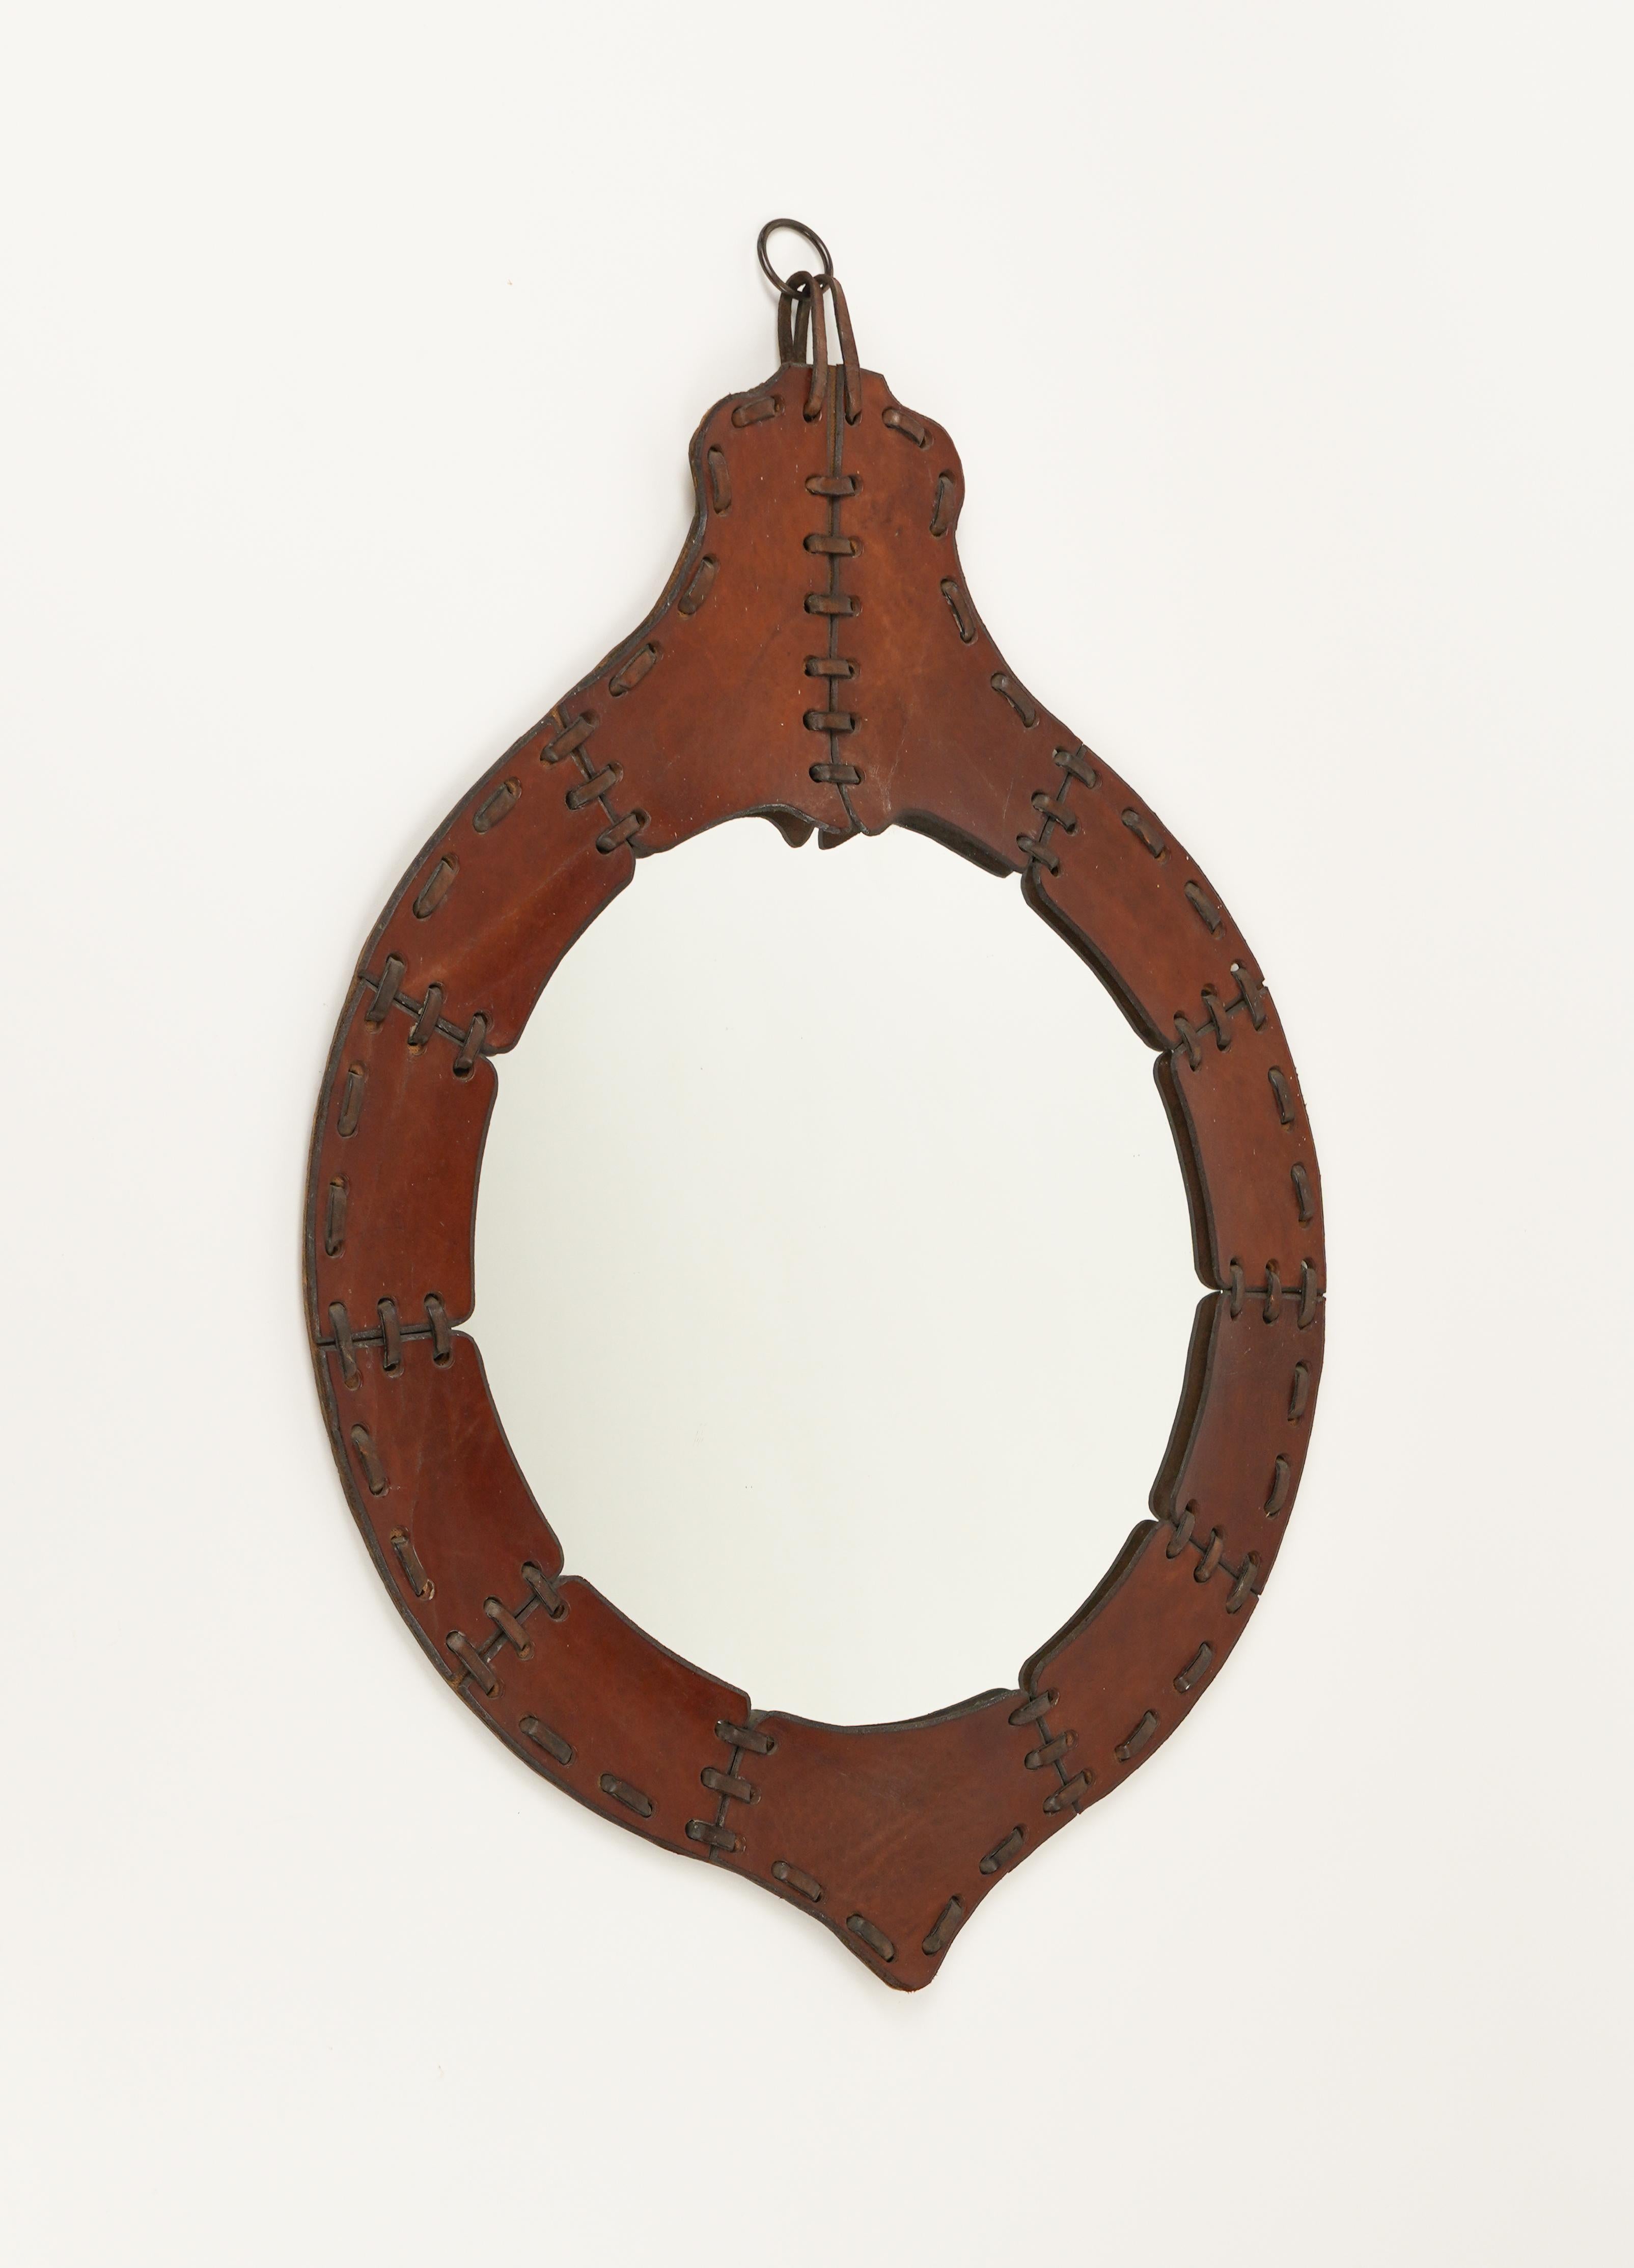 Midcentury amazing teardrop wall mirror in brown leather.

Made in Italy in the 1960s.